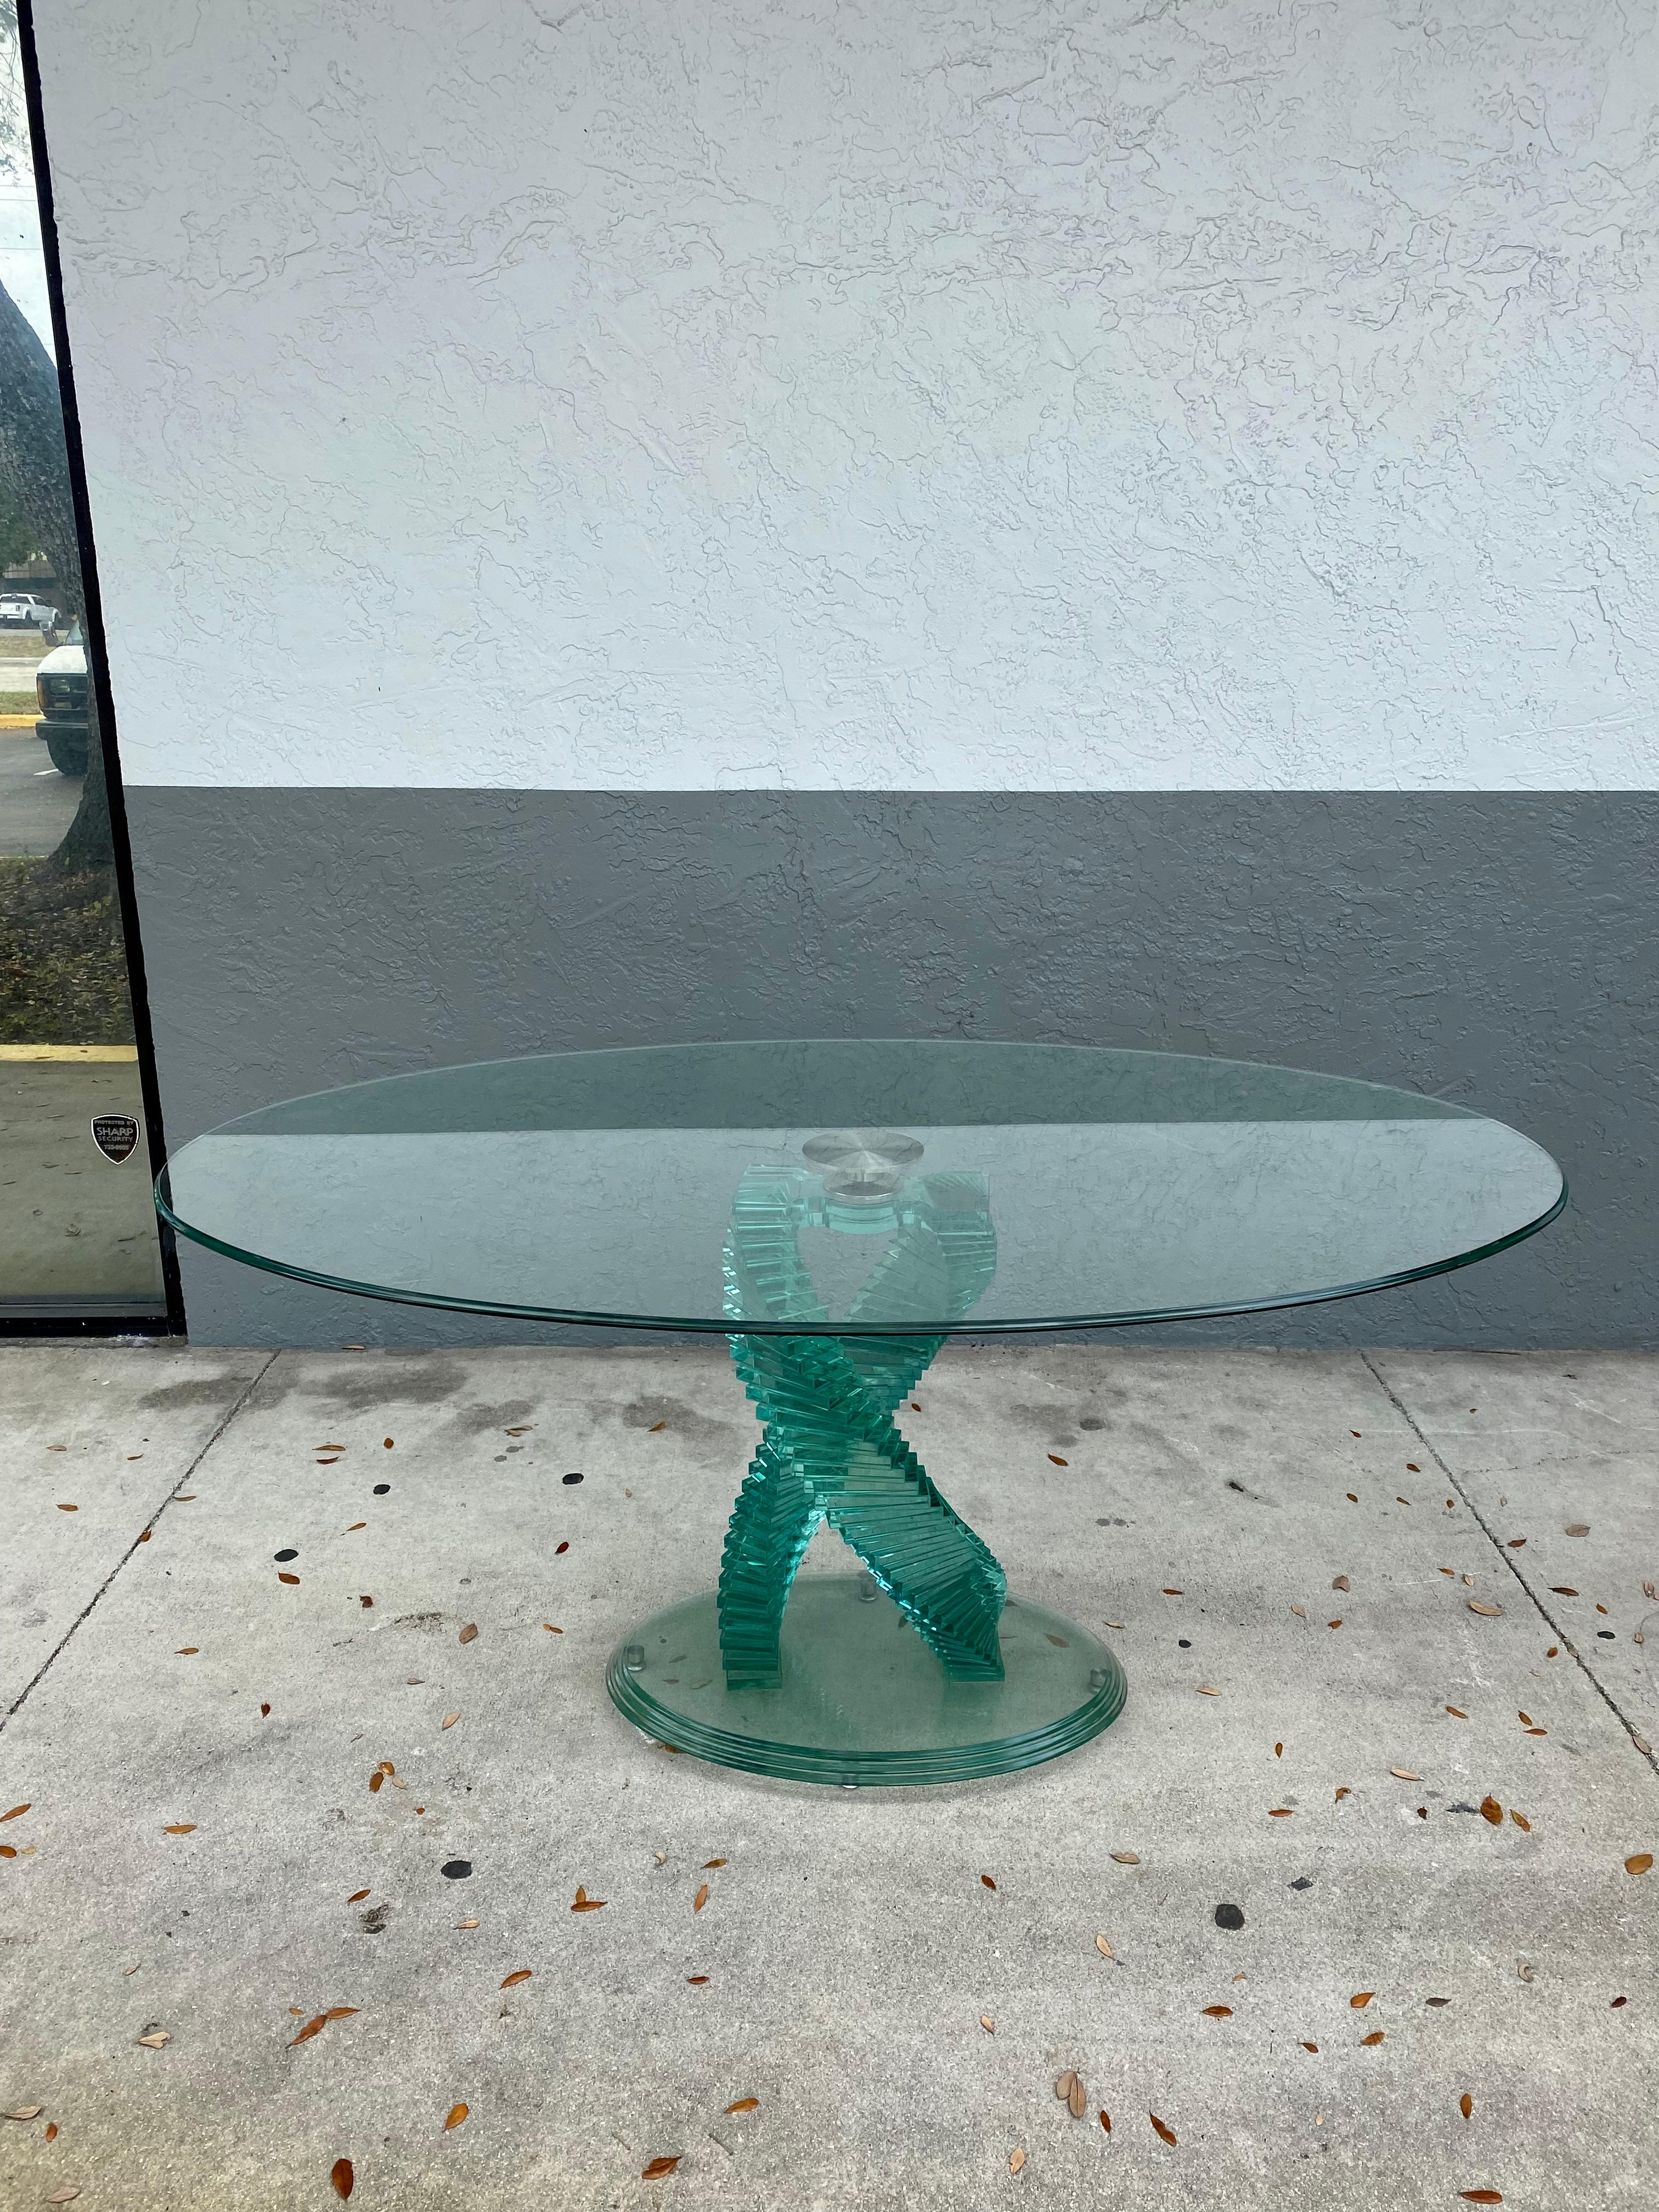 On offer on this occasion is one of the most stunning, dining table you could hope to find. This is an ultra-rare opportunity to acquire what is, unequivocally, the best of the best, it being a most spectacular and beautifully-presented table.